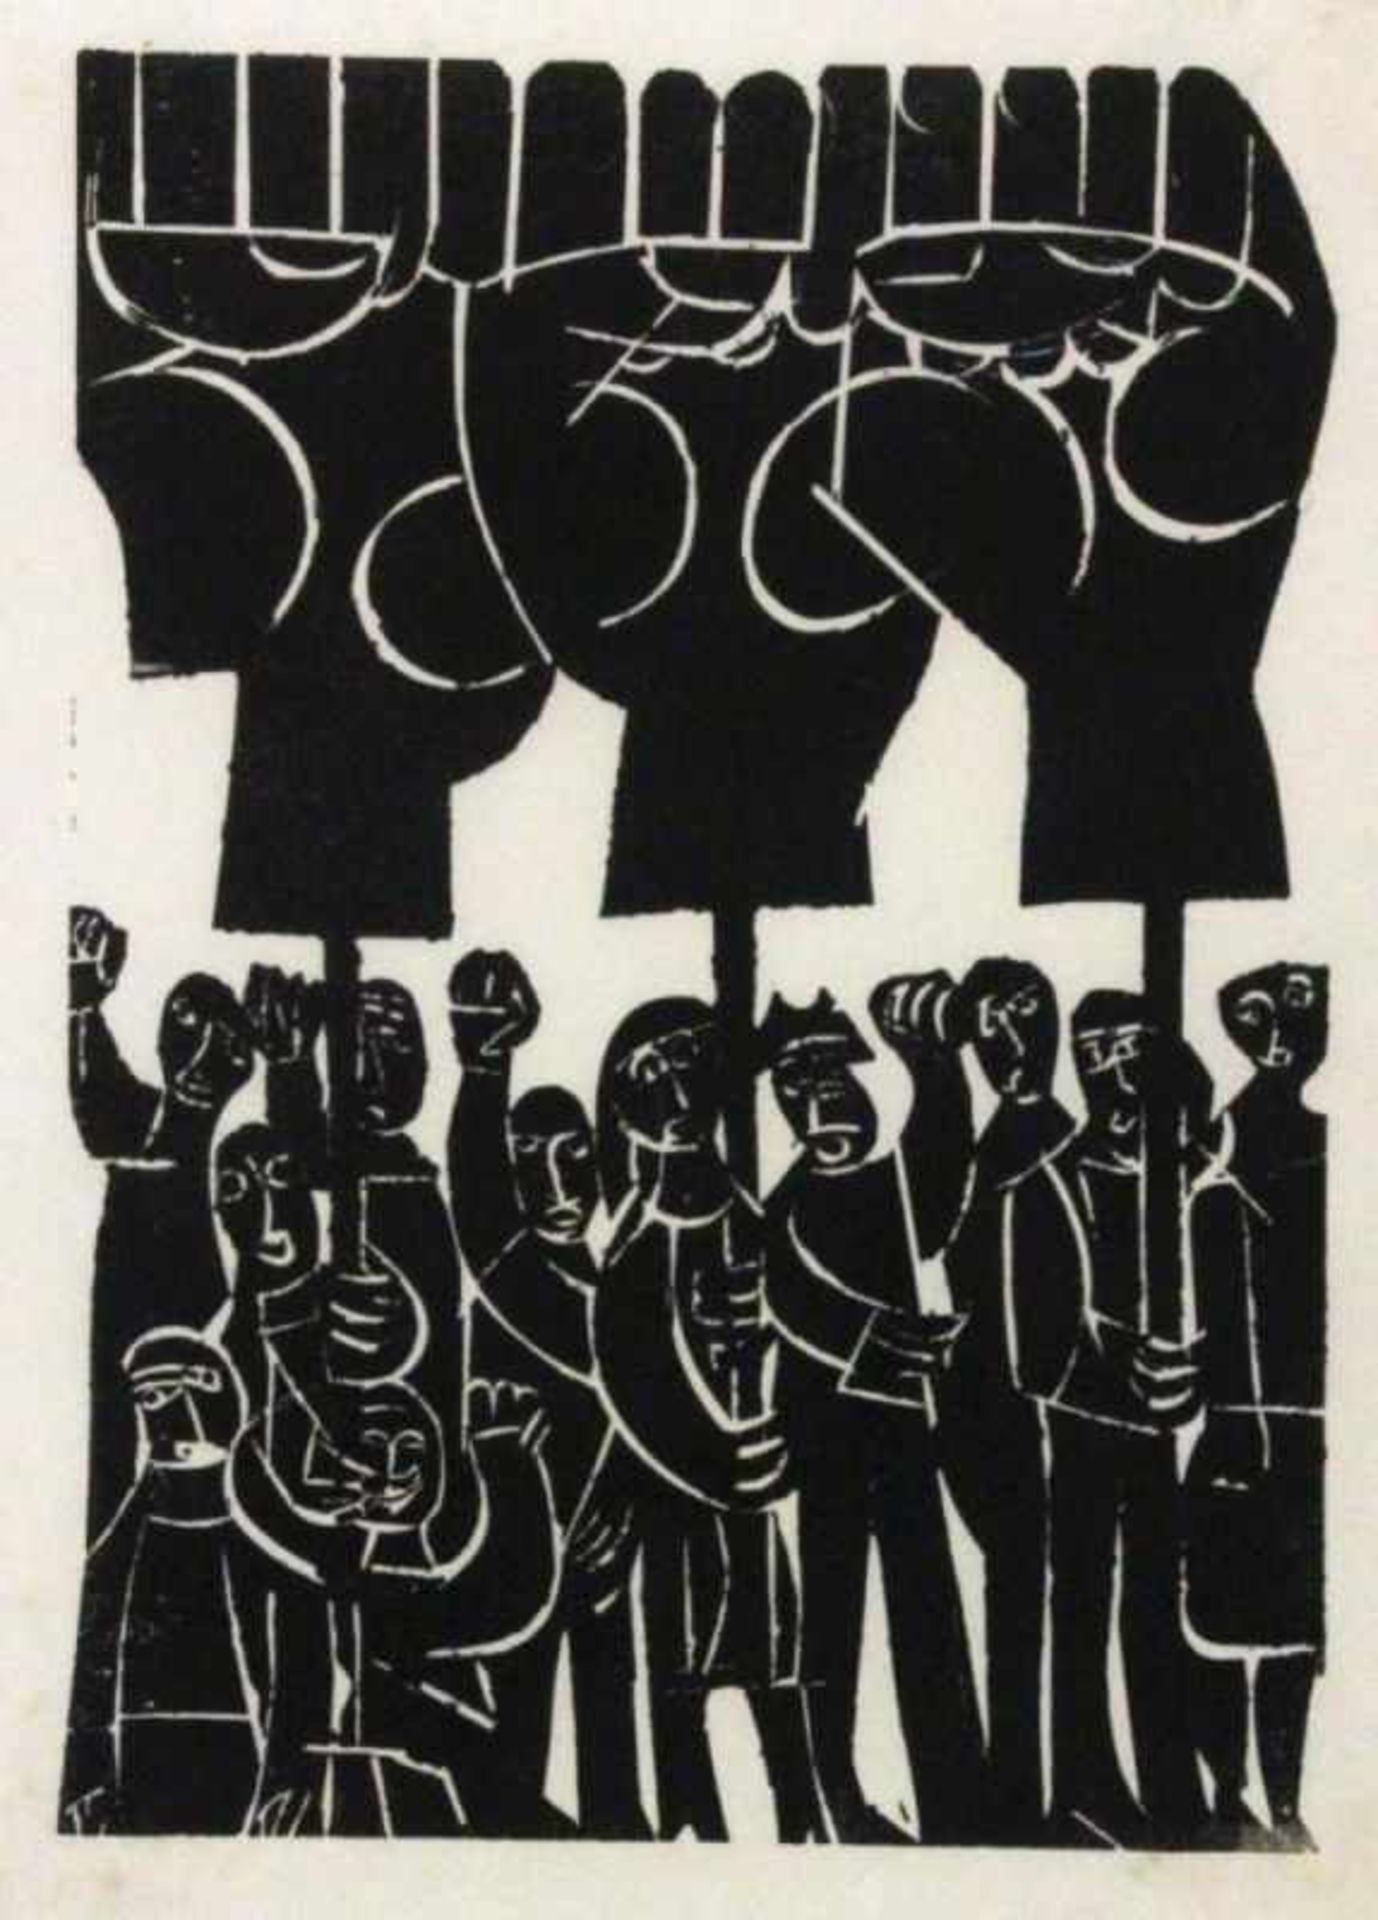 GRIESHABER, HAP Rot an der Rot 1909 - 1981 Achalm Fists. Woodcut, black, 1973. Hand